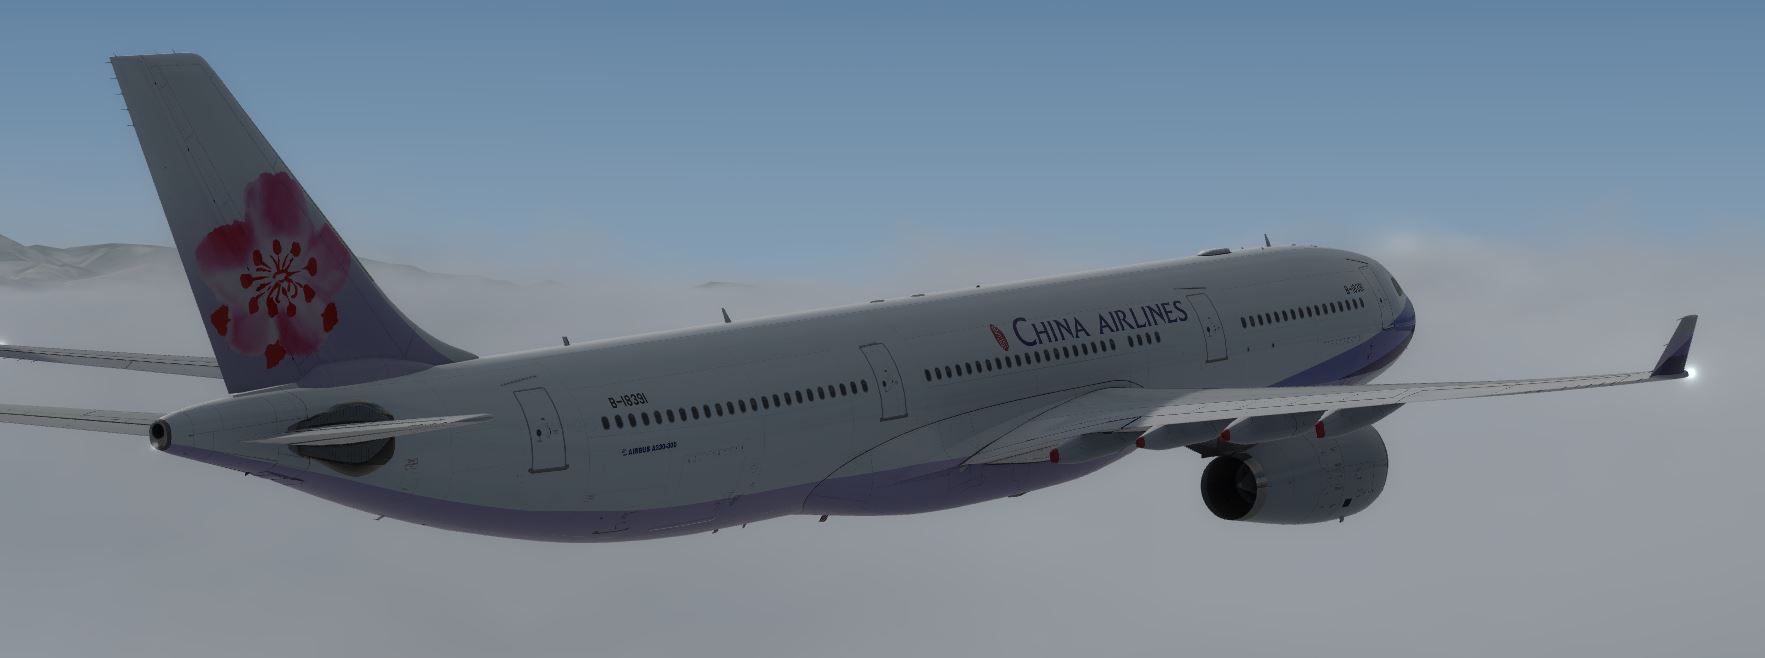 AS A330 ChinaAirline-7326 